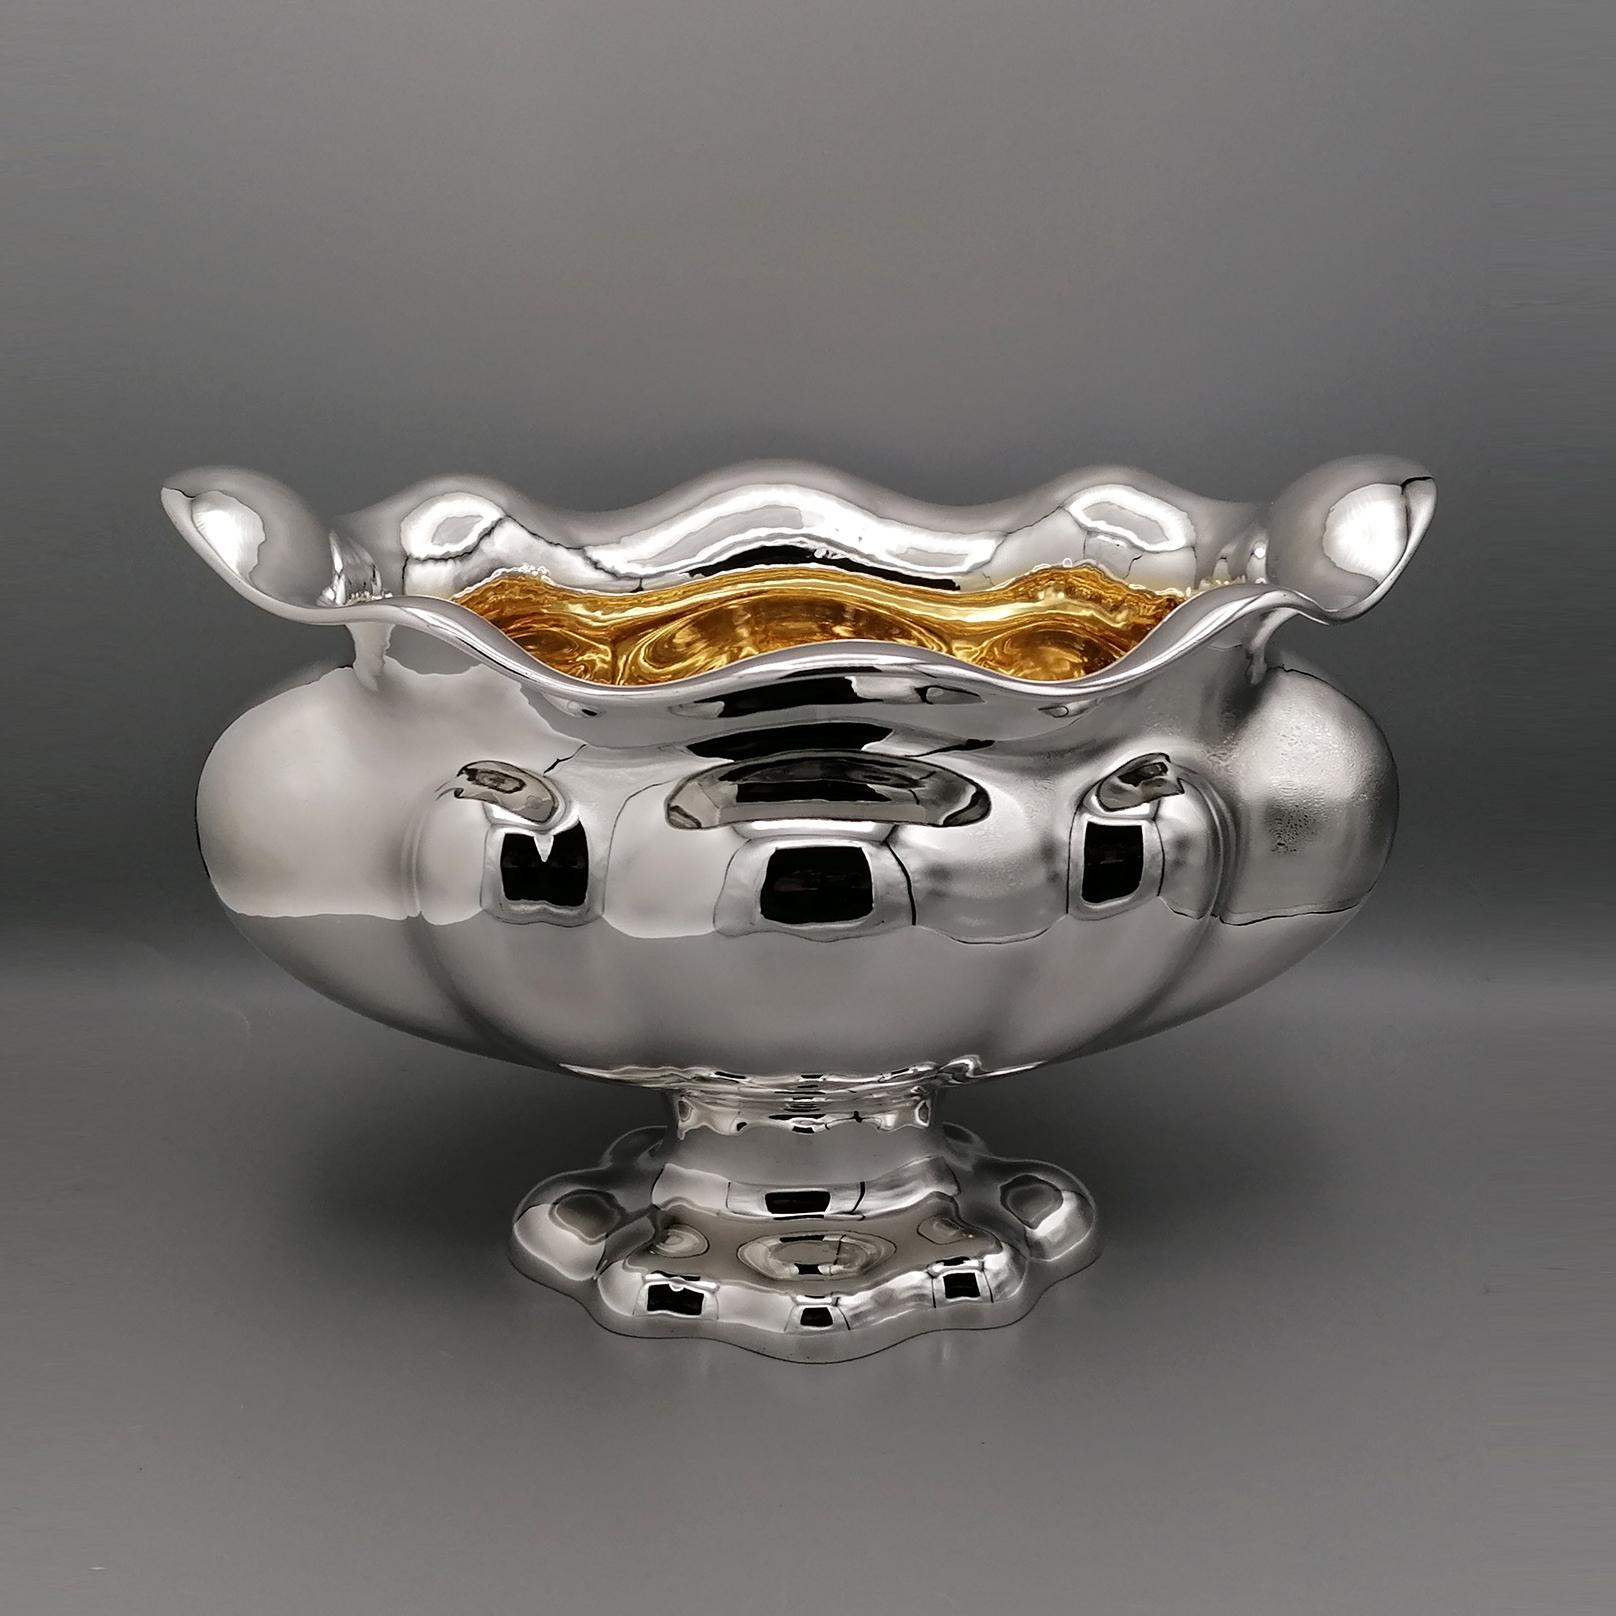 Oval centerpiece completely handmade and with 24kt golden internal finish.
The piece was modeled by hand from a flat slab of solid 800 silver, padded and embossed with ashlar motif of different sizes.
The upper part of the centerpiece has been